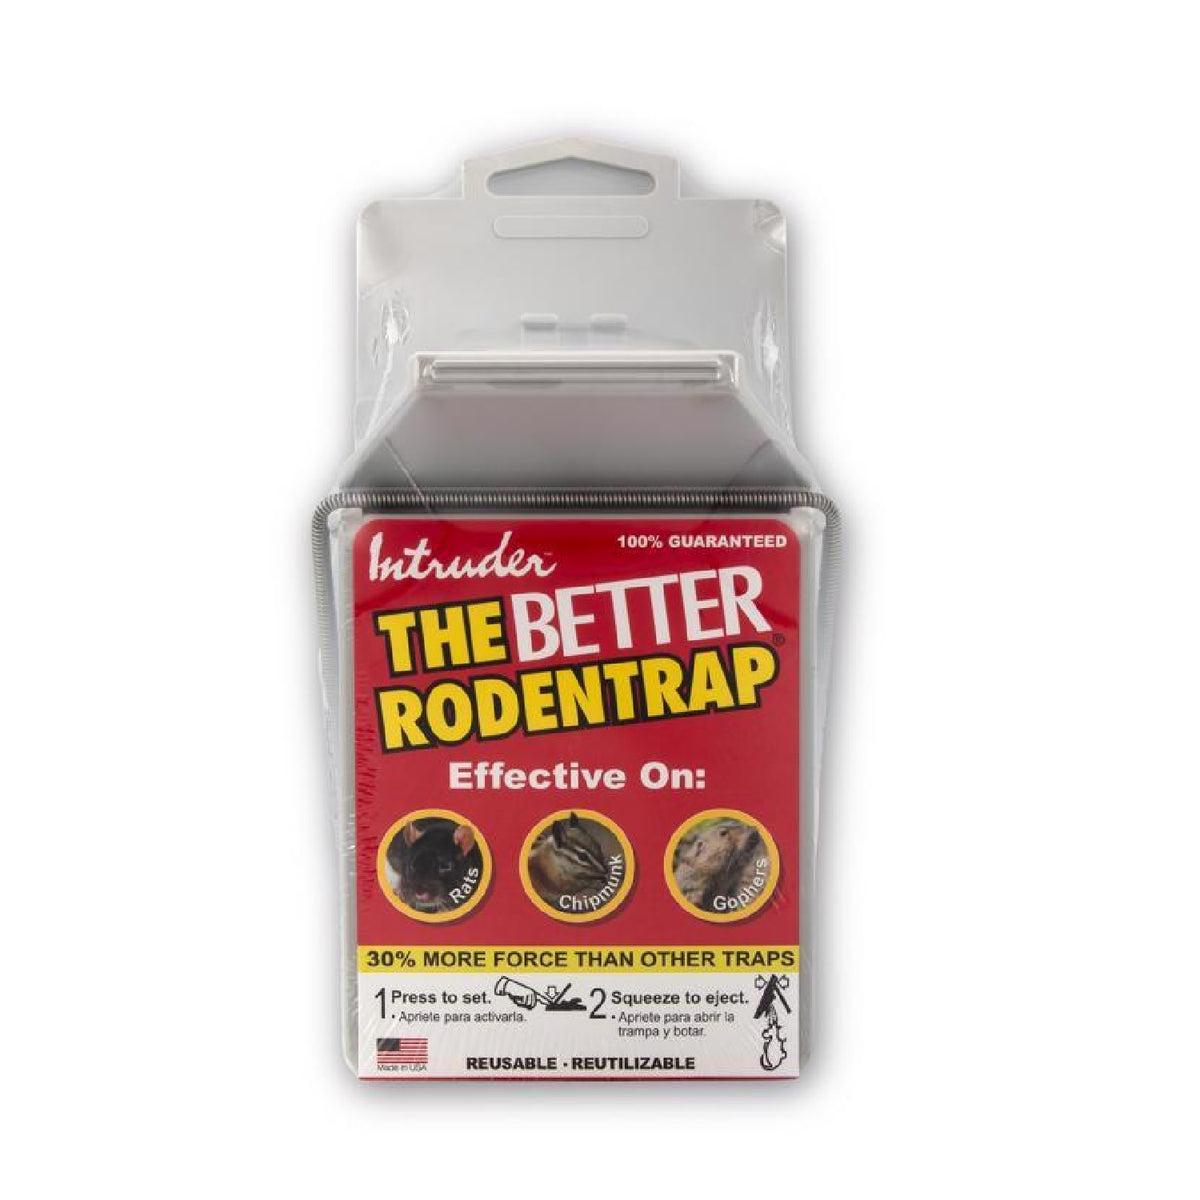 The Better Mousetrap Intruder Snap Trap For Mice 2-Pack.